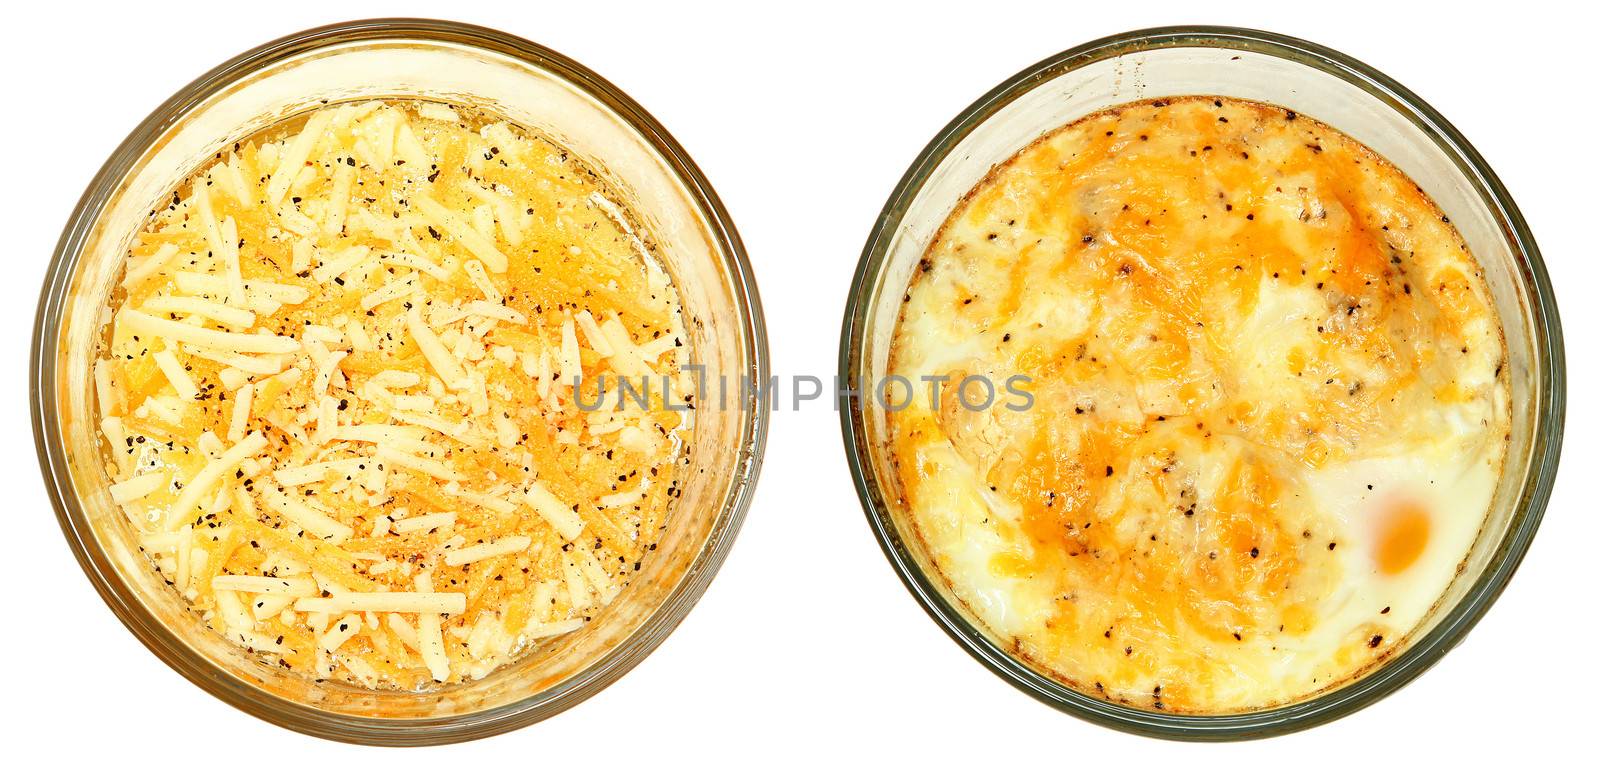 Before and After Oven Baked Eggs with Cheese by duplass